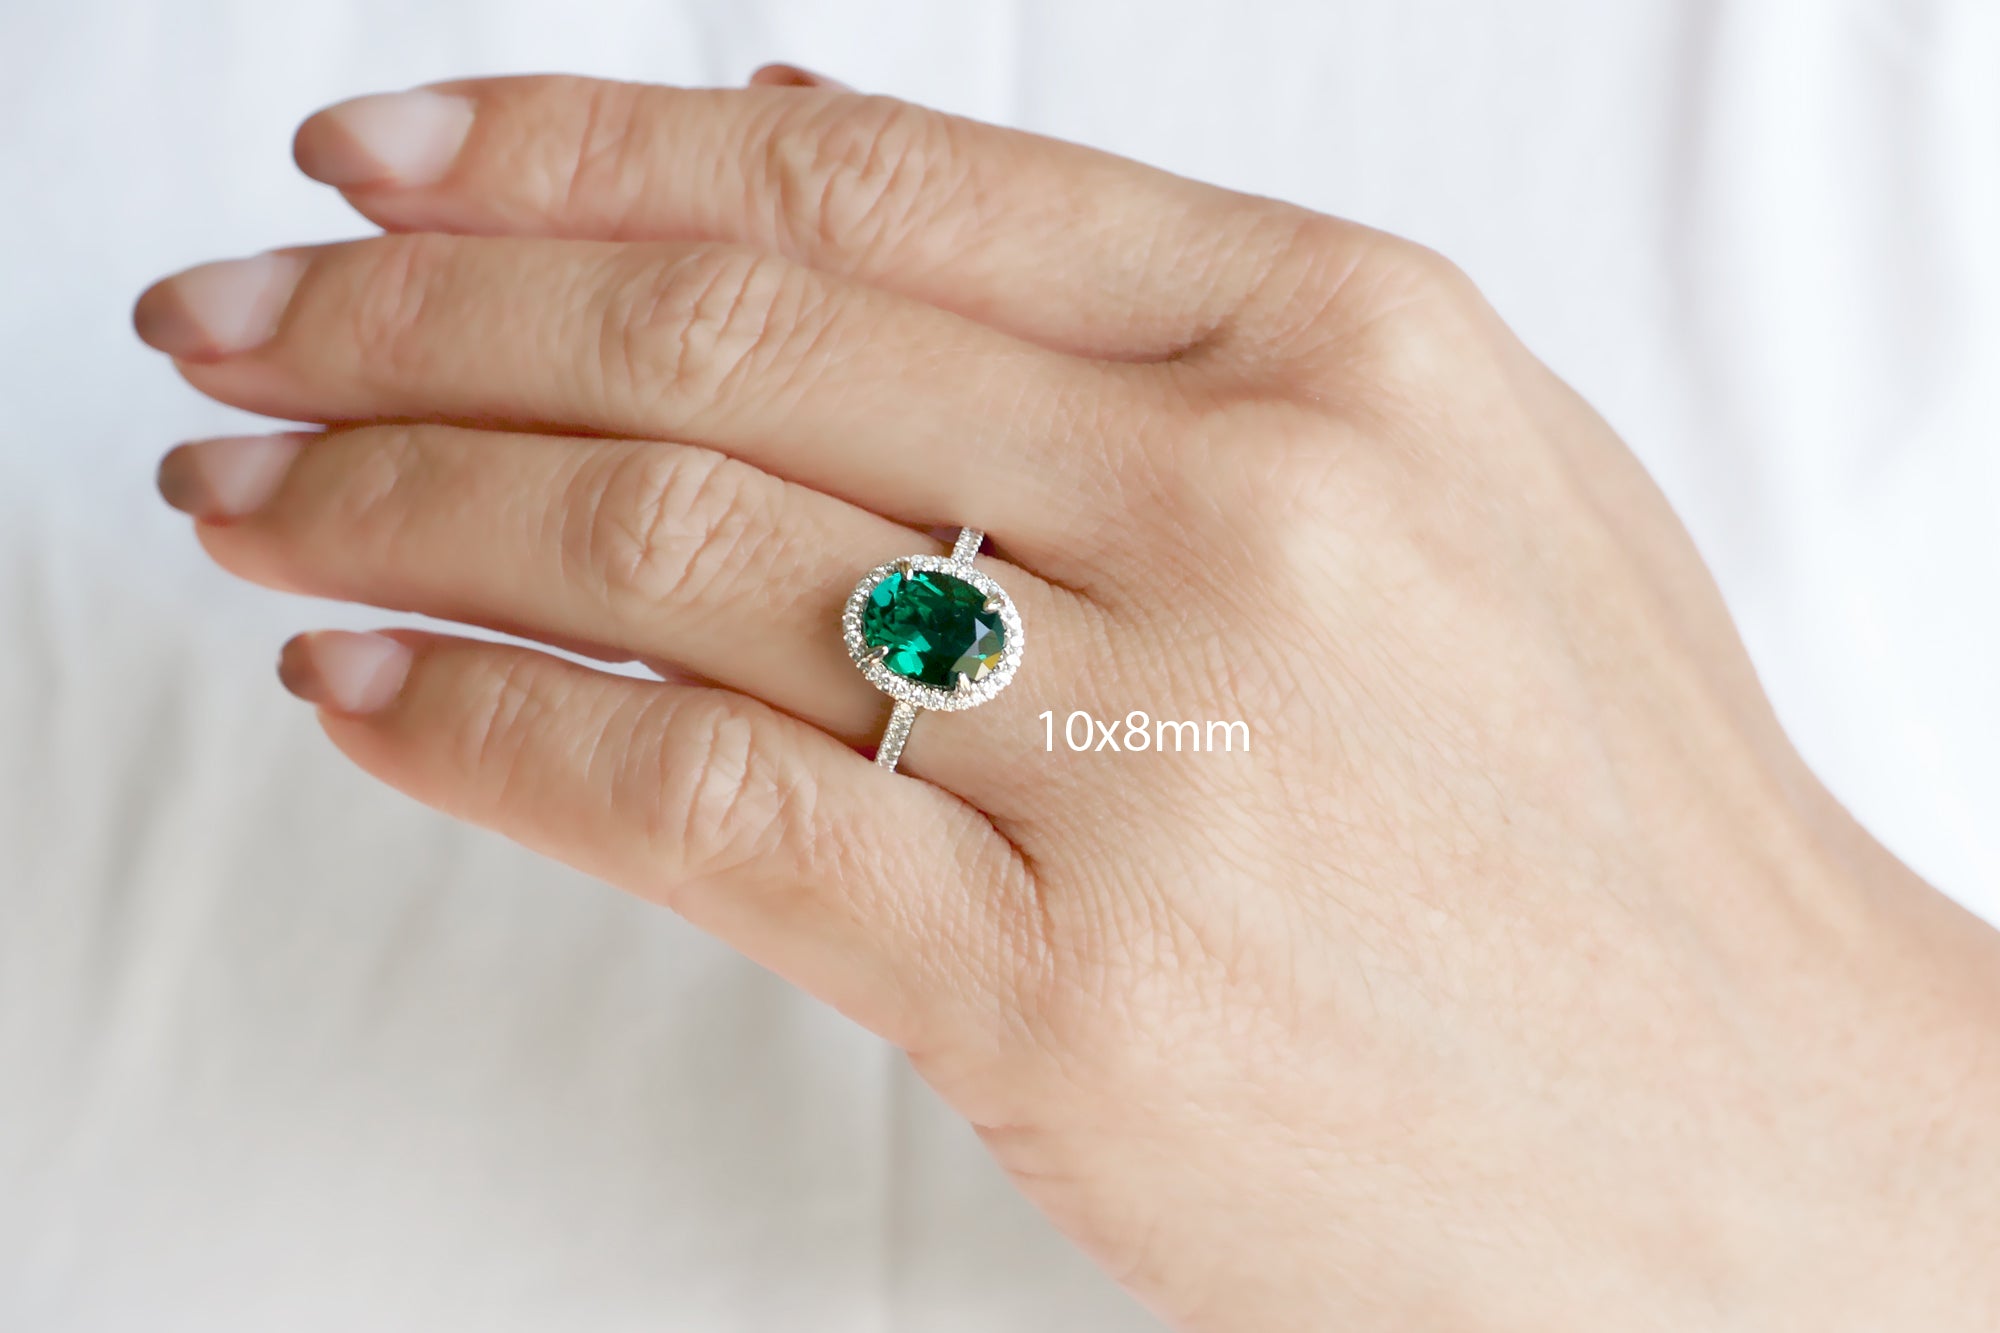 Colombian Emerald Ring - 1.21 ctw Genuine Oval Emerald and Diamond Ring in  14k white gold (E-5868)